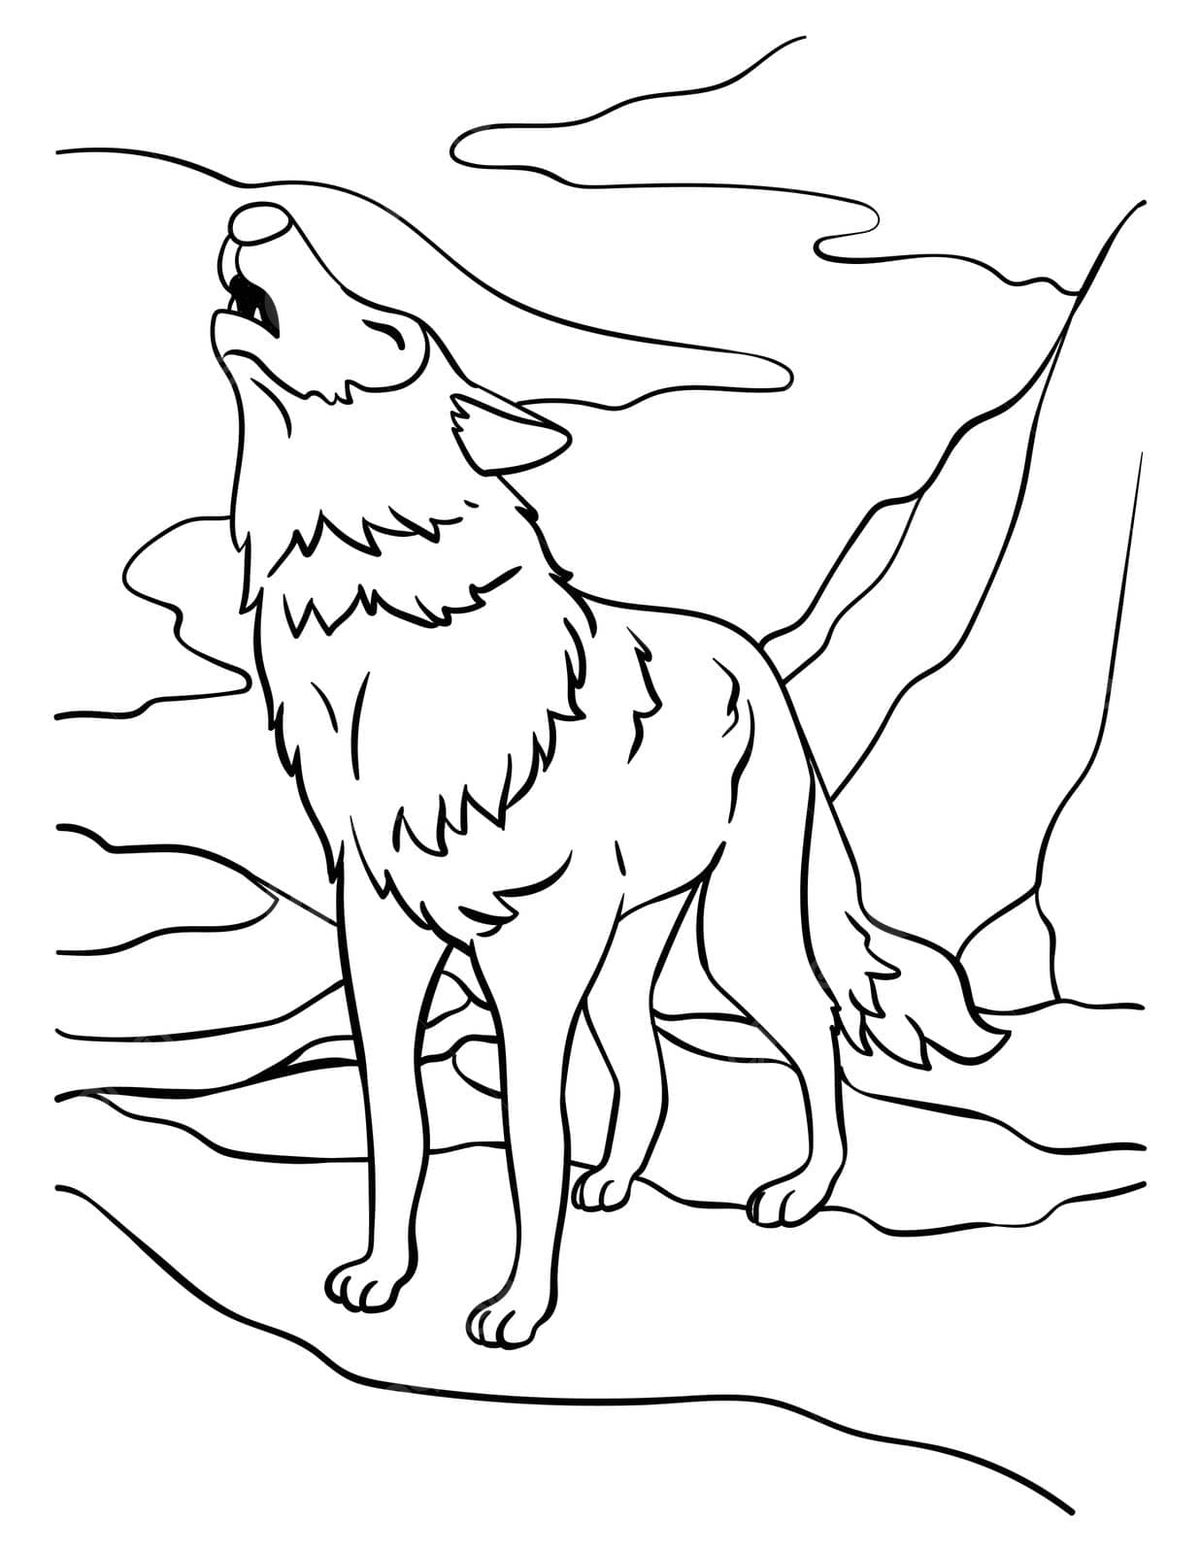 Wolf drawing png vector psd and clipart with transparent background for free download